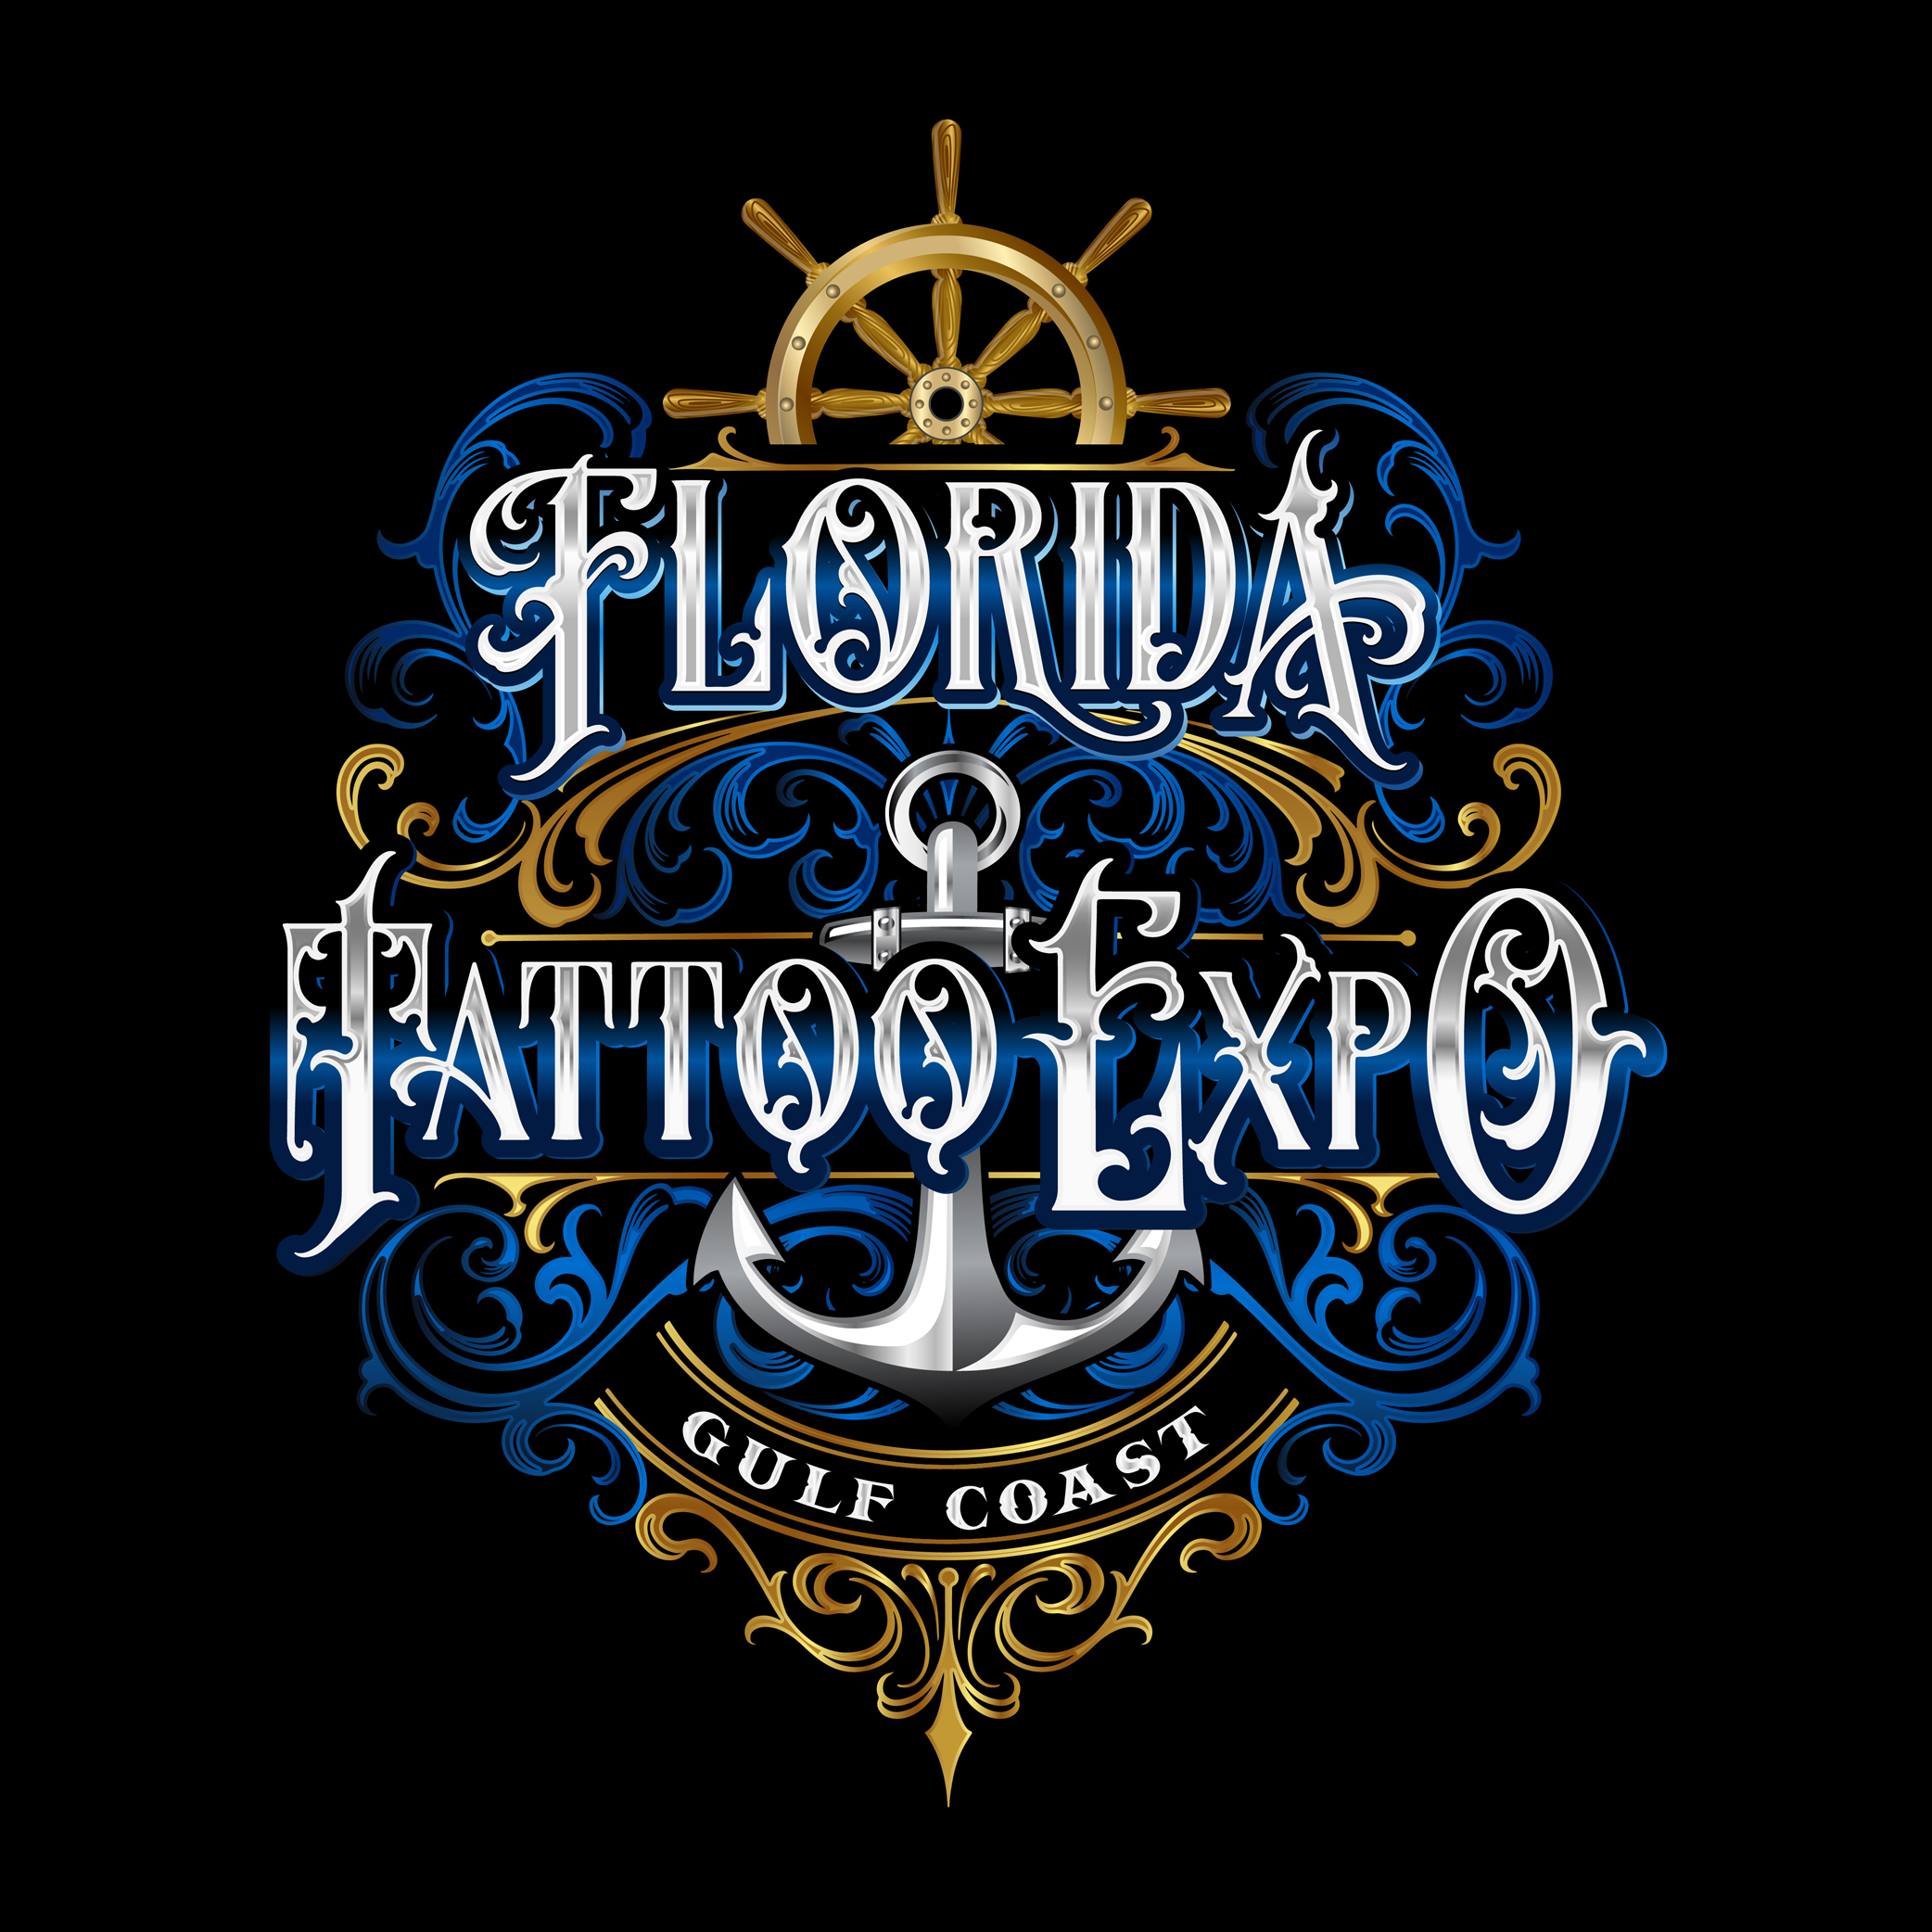 How to get to Florida Gulf Coast Tattoo Expo in Fort Myers by Bus?